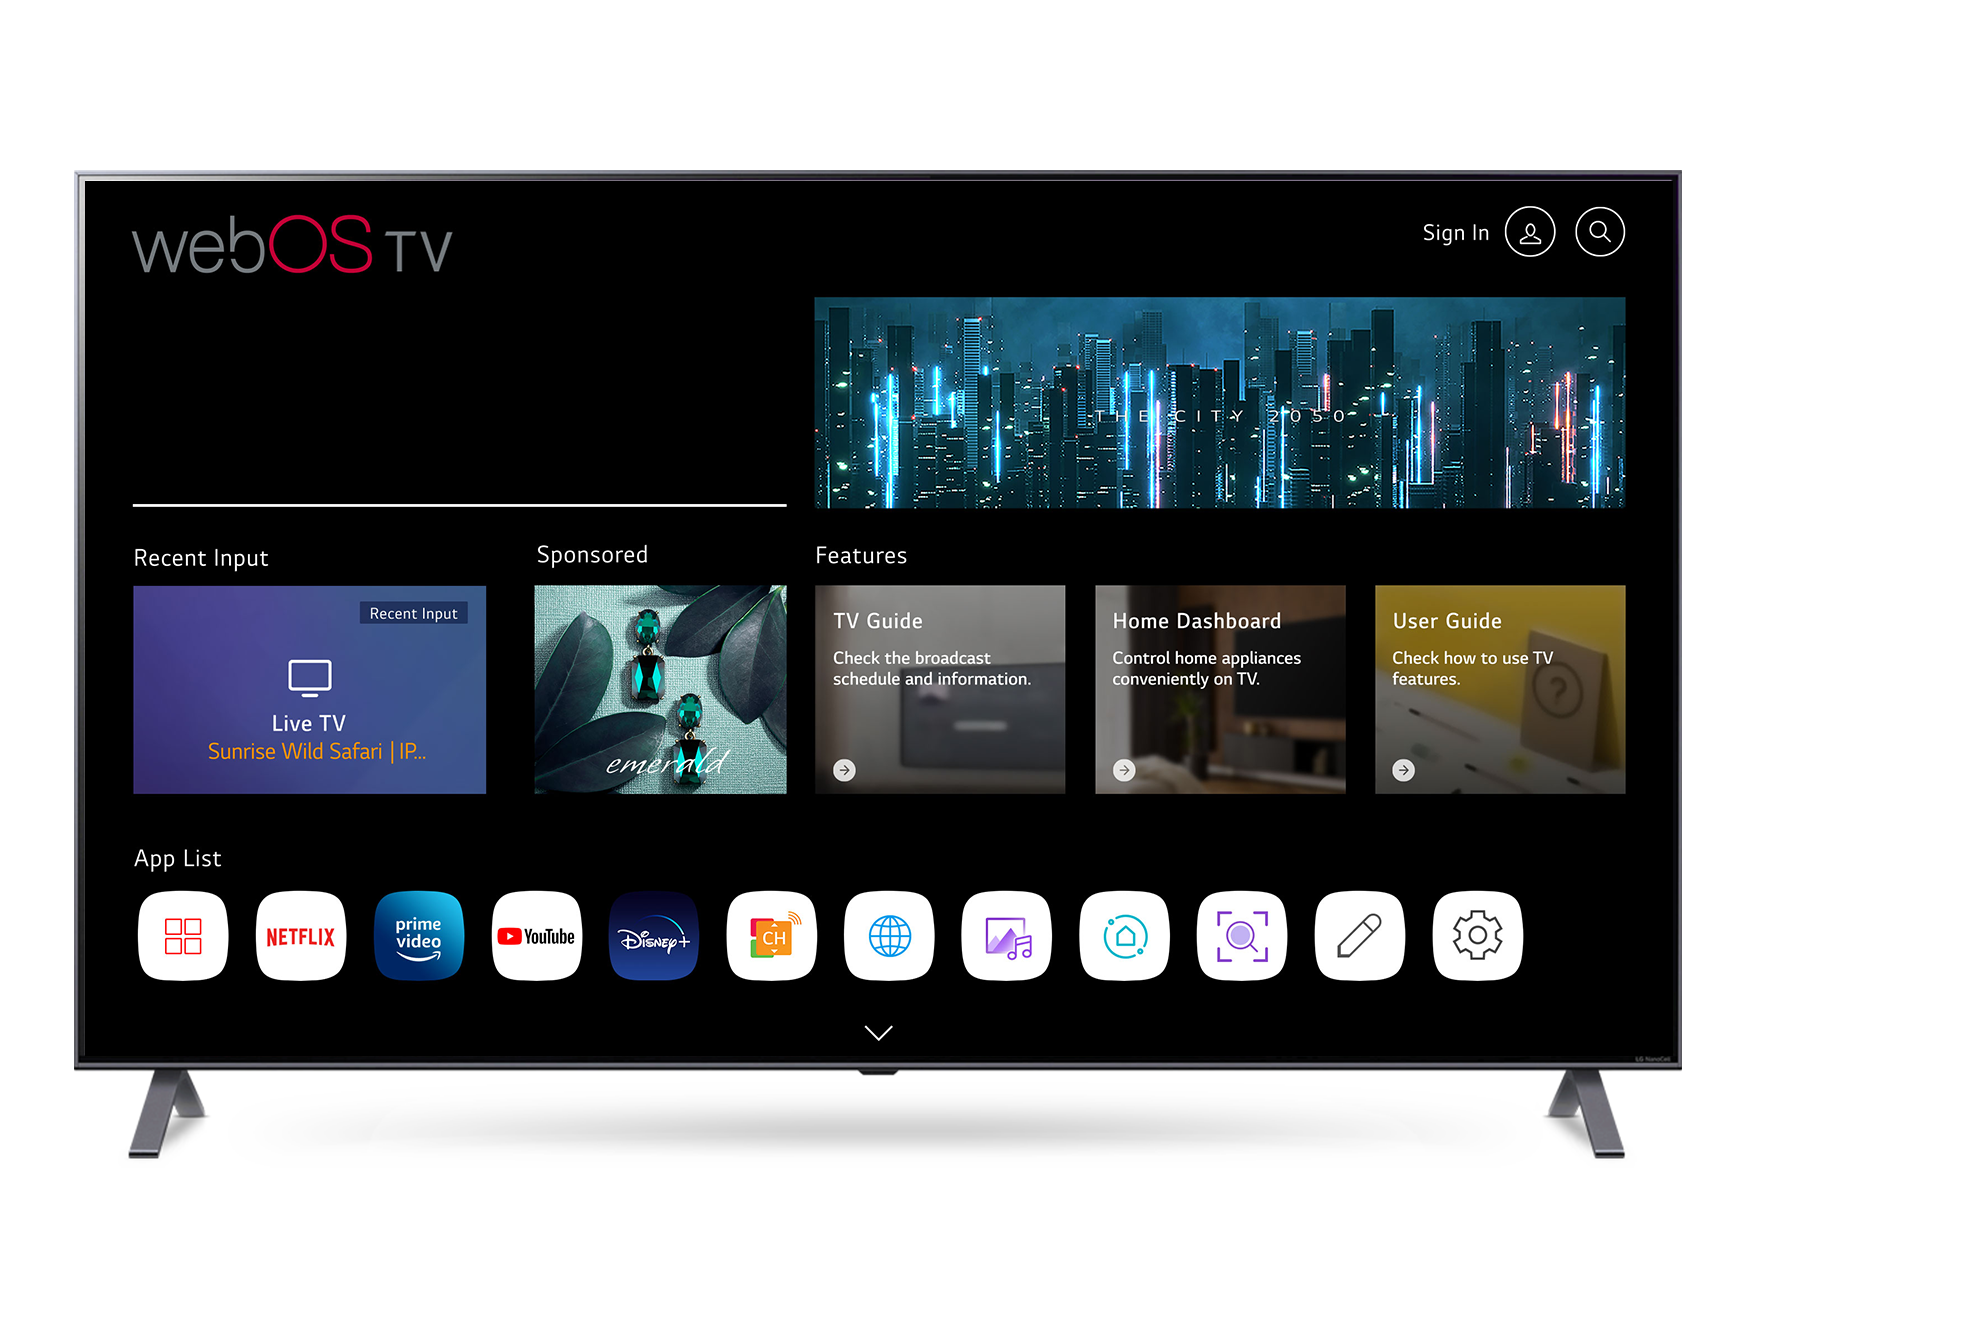 Twitch app now available on LG webOS TVs 